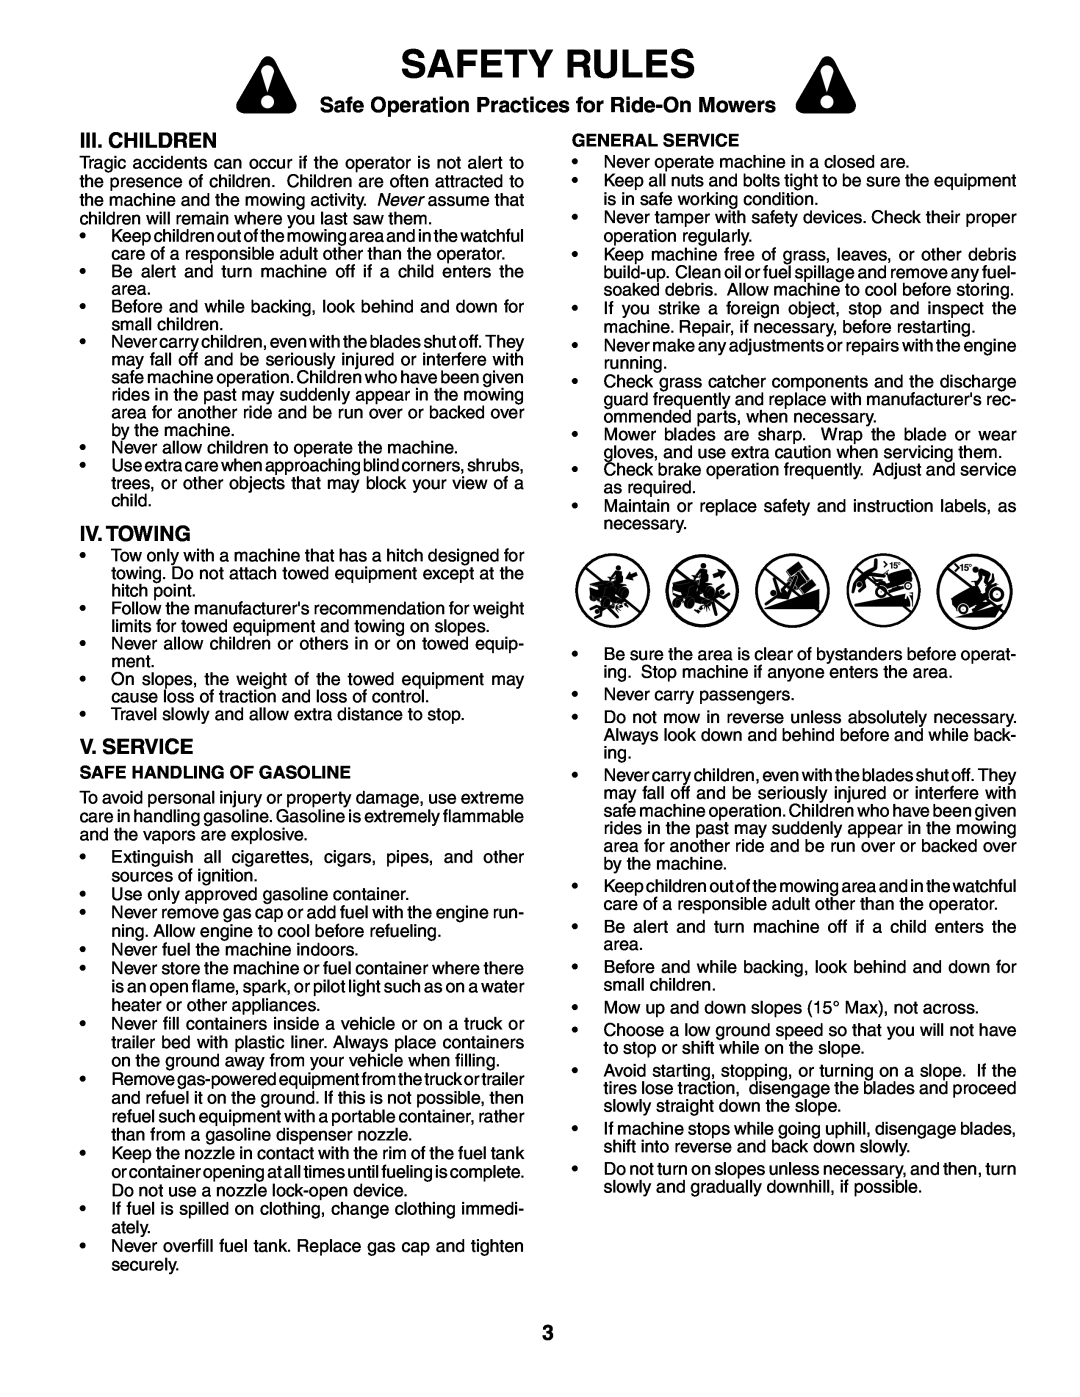 Poulan PK1942YT manual Iii. Children, Iv. Towing, V. Service, Safety Rules, Safe Operation Practices for Ride-On Mowers 